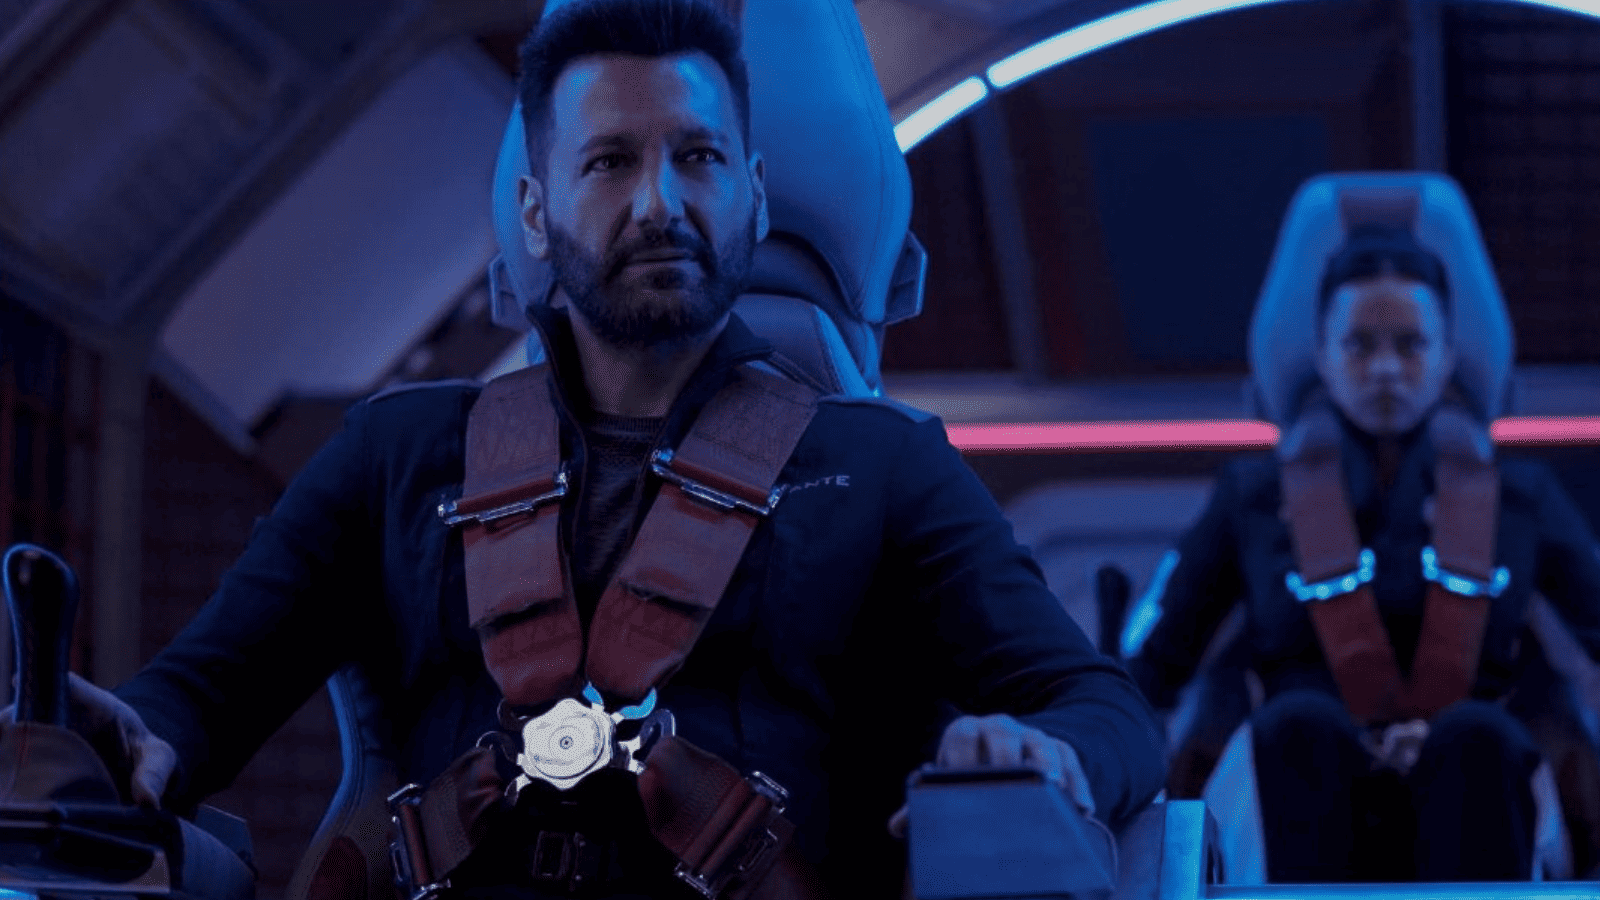 Scene from The Expanse